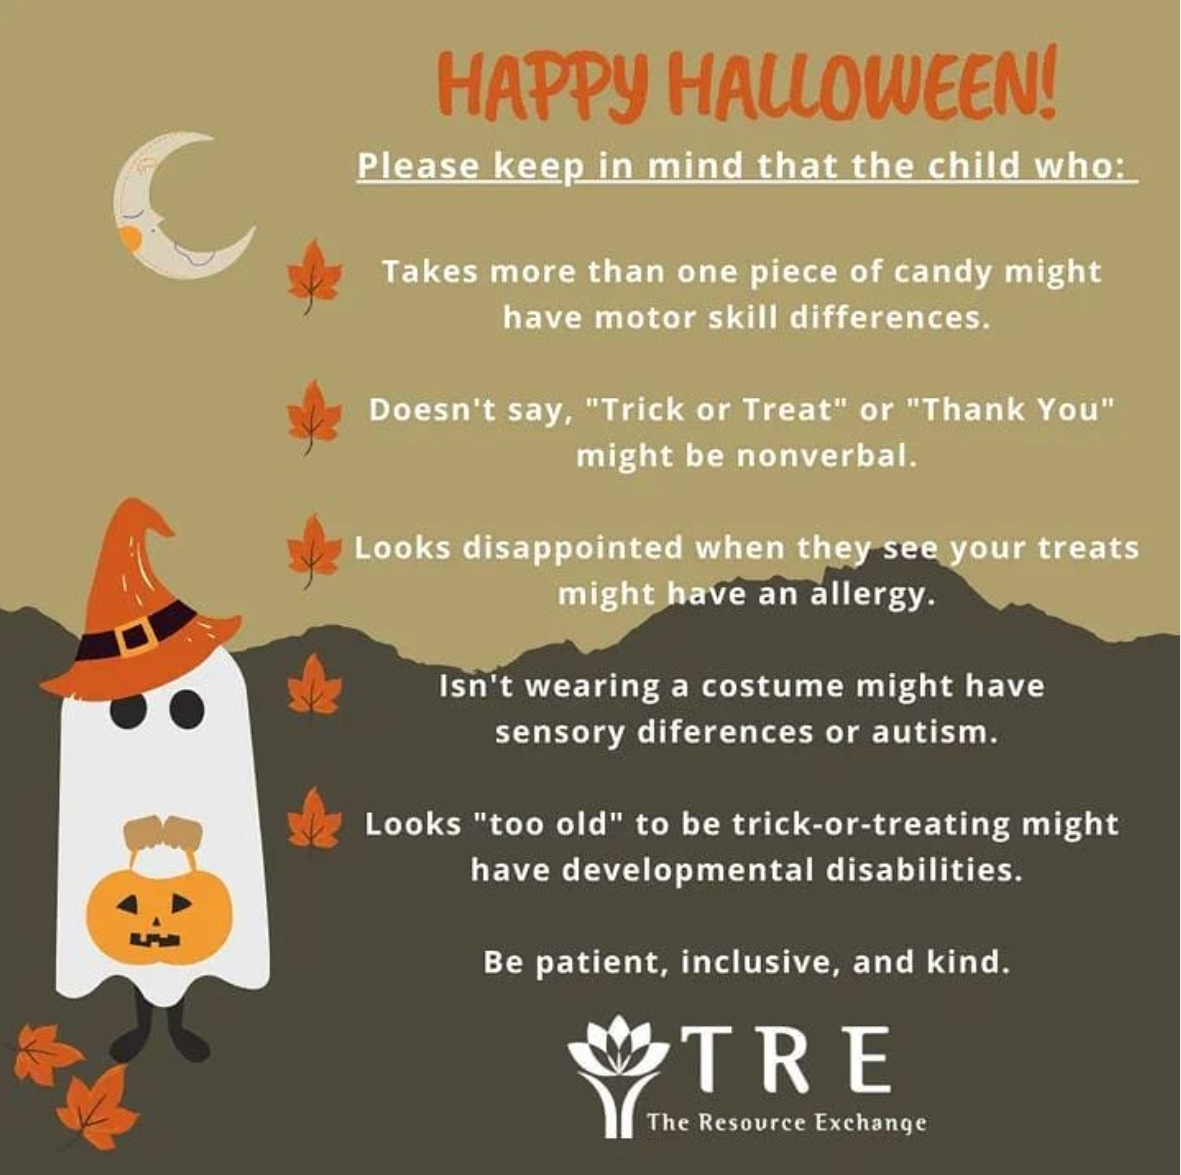 image with carton trick-or-treater and tips for an inclusive halloween including a child not wearing a costume might have sensory differences